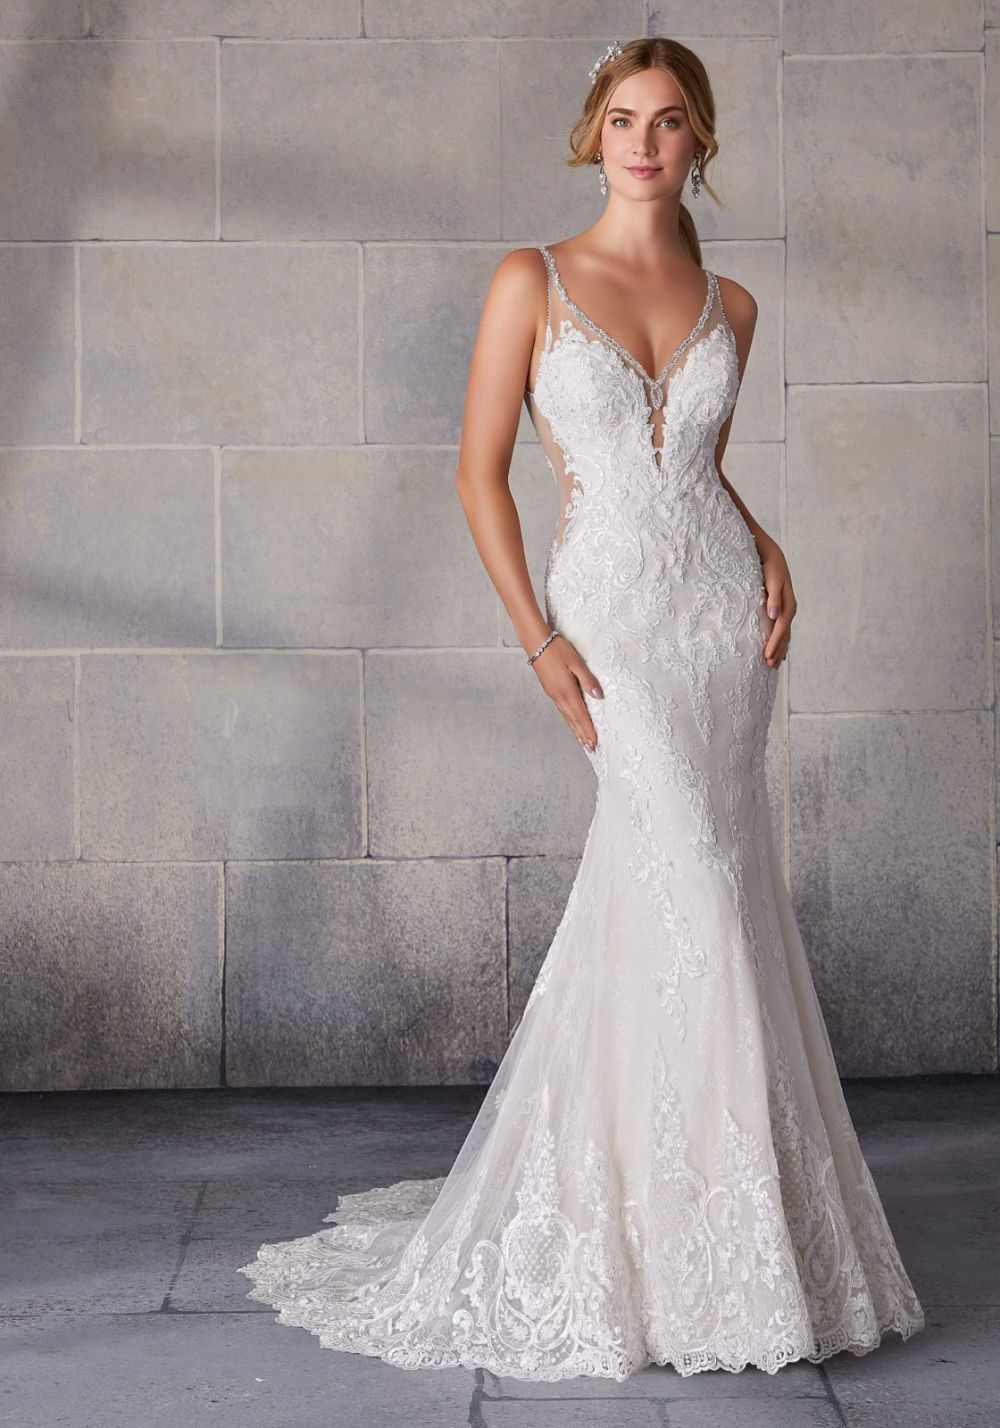 SOFIA 2139 by Mori Lee by Madeline Gardner